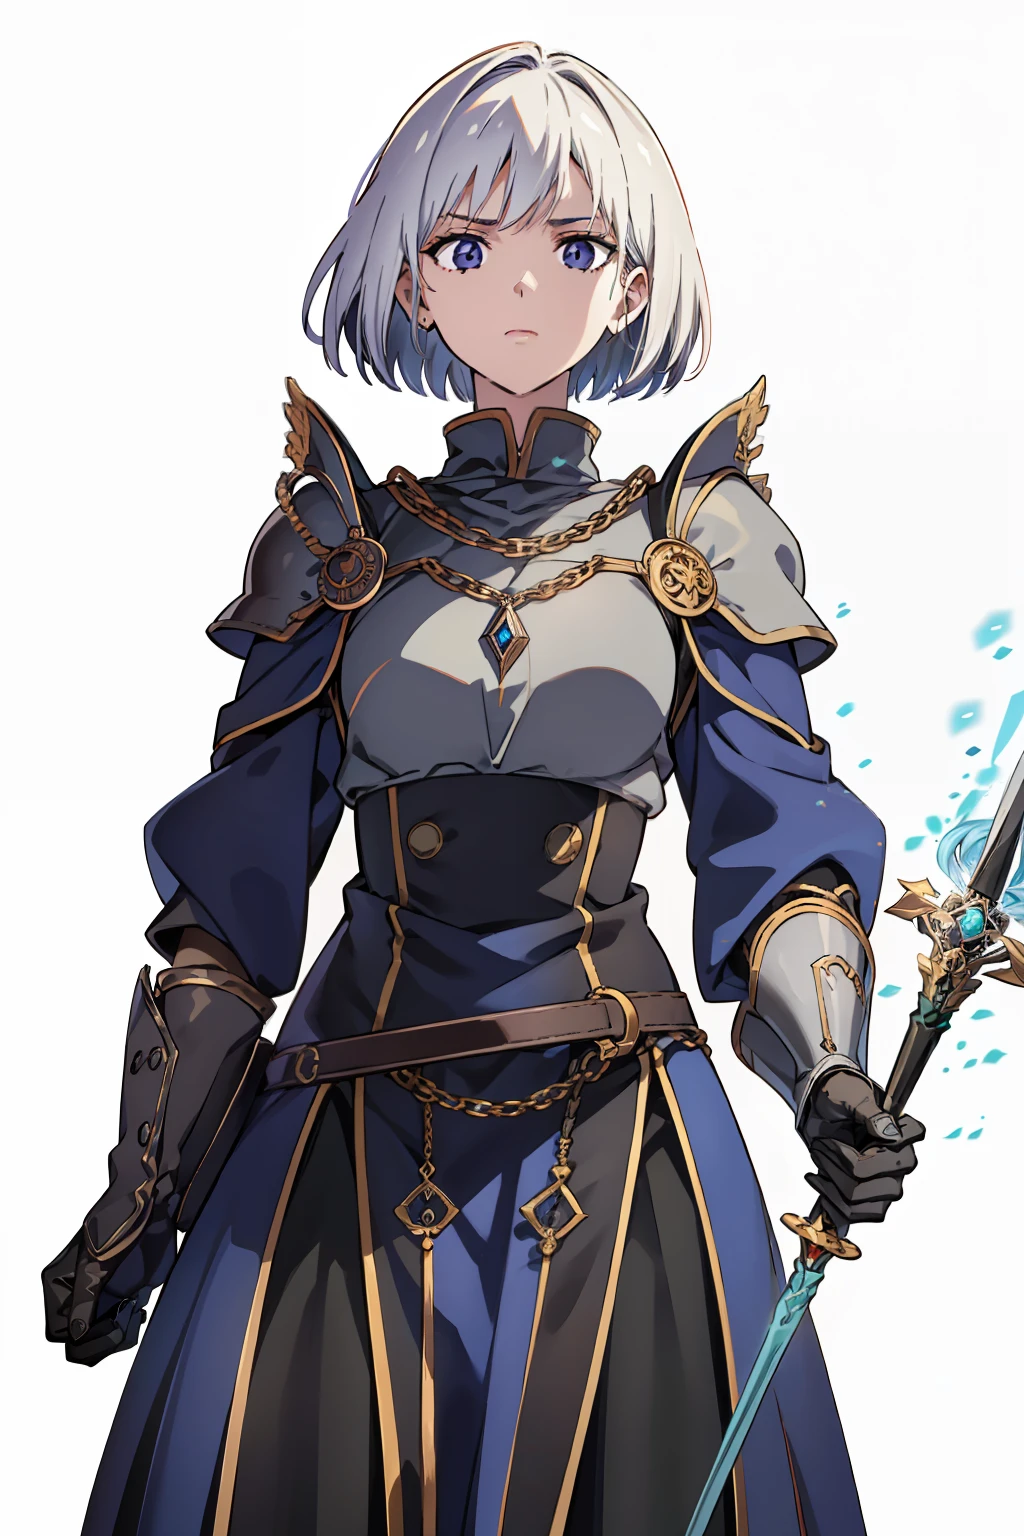 one female, 16 yrs old, Short White Hair, circunstanciado, Black eye, emotionless face, wearing a shoulder pad, A Wizard&#39;s Dress, holding a mage's staff in his hand, front camera, White background